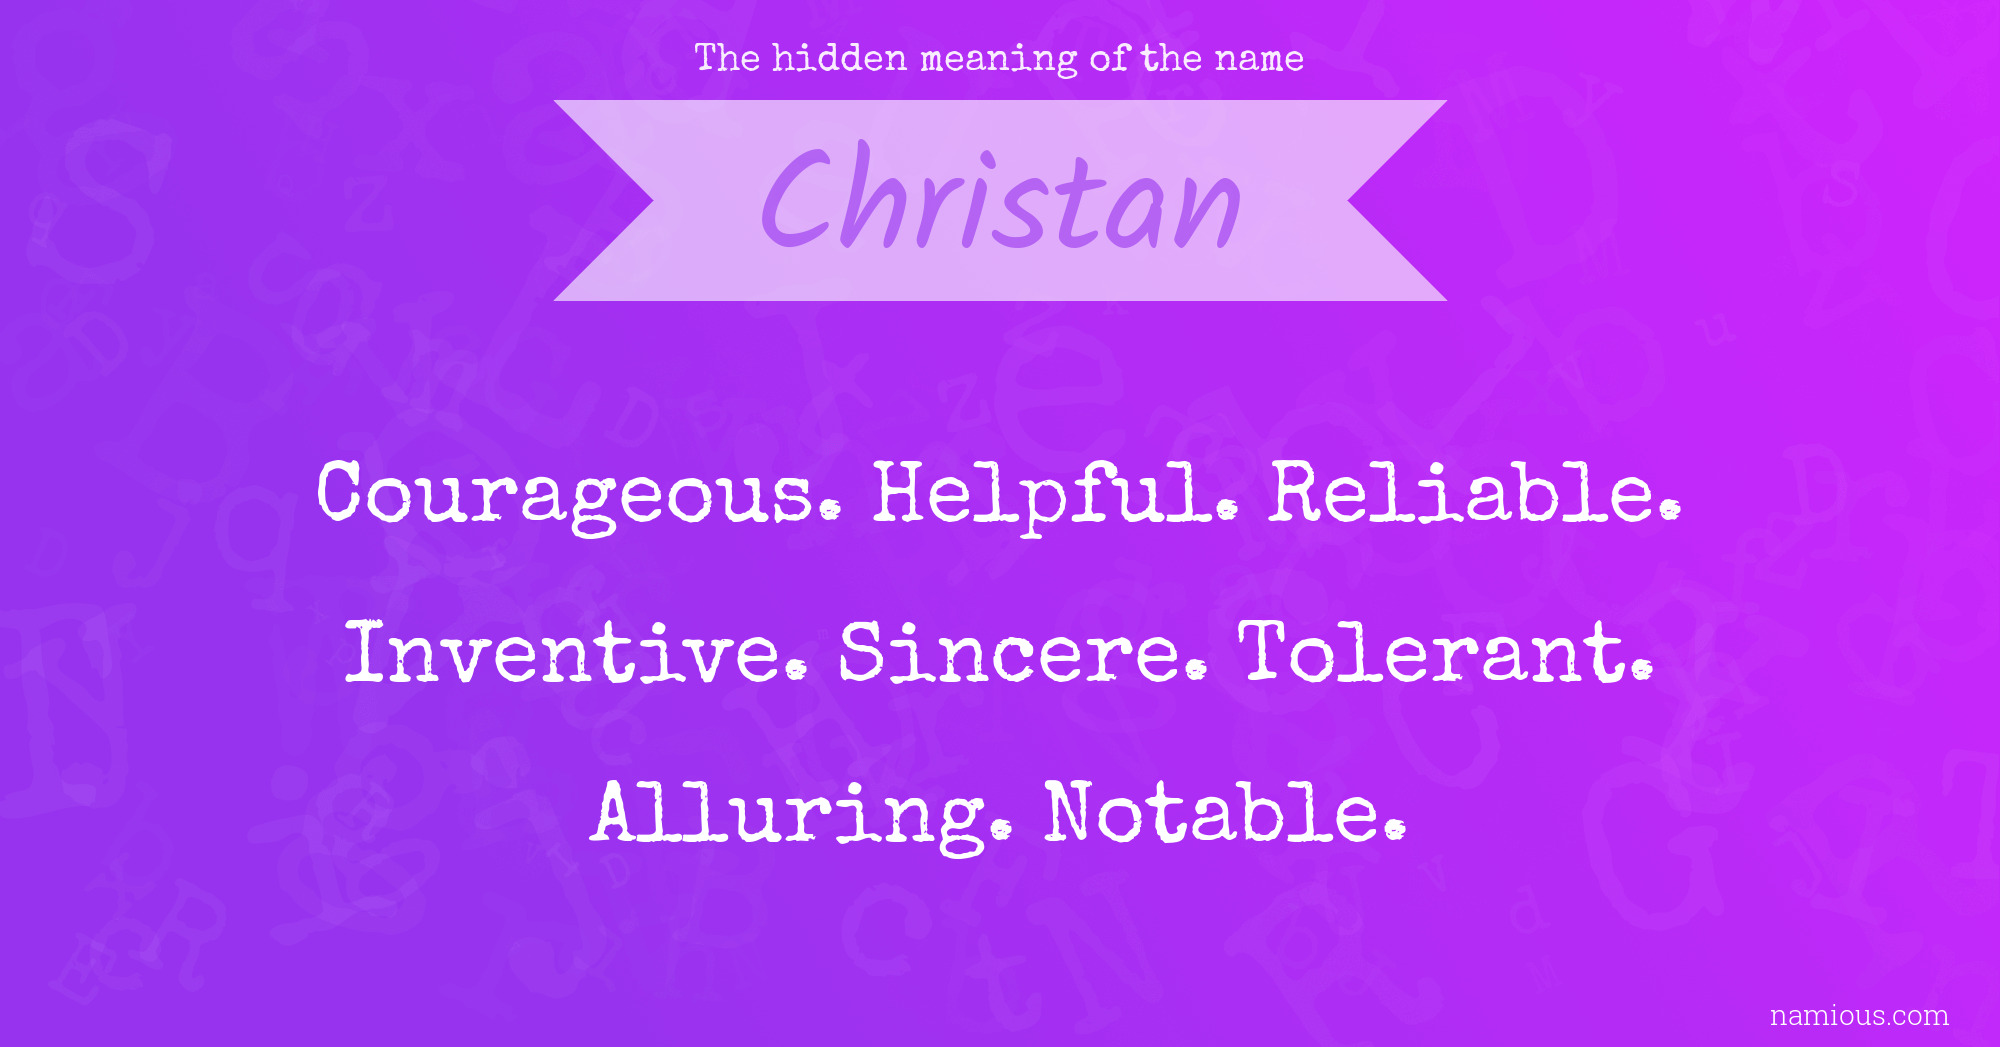 The hidden meaning of the name Christan